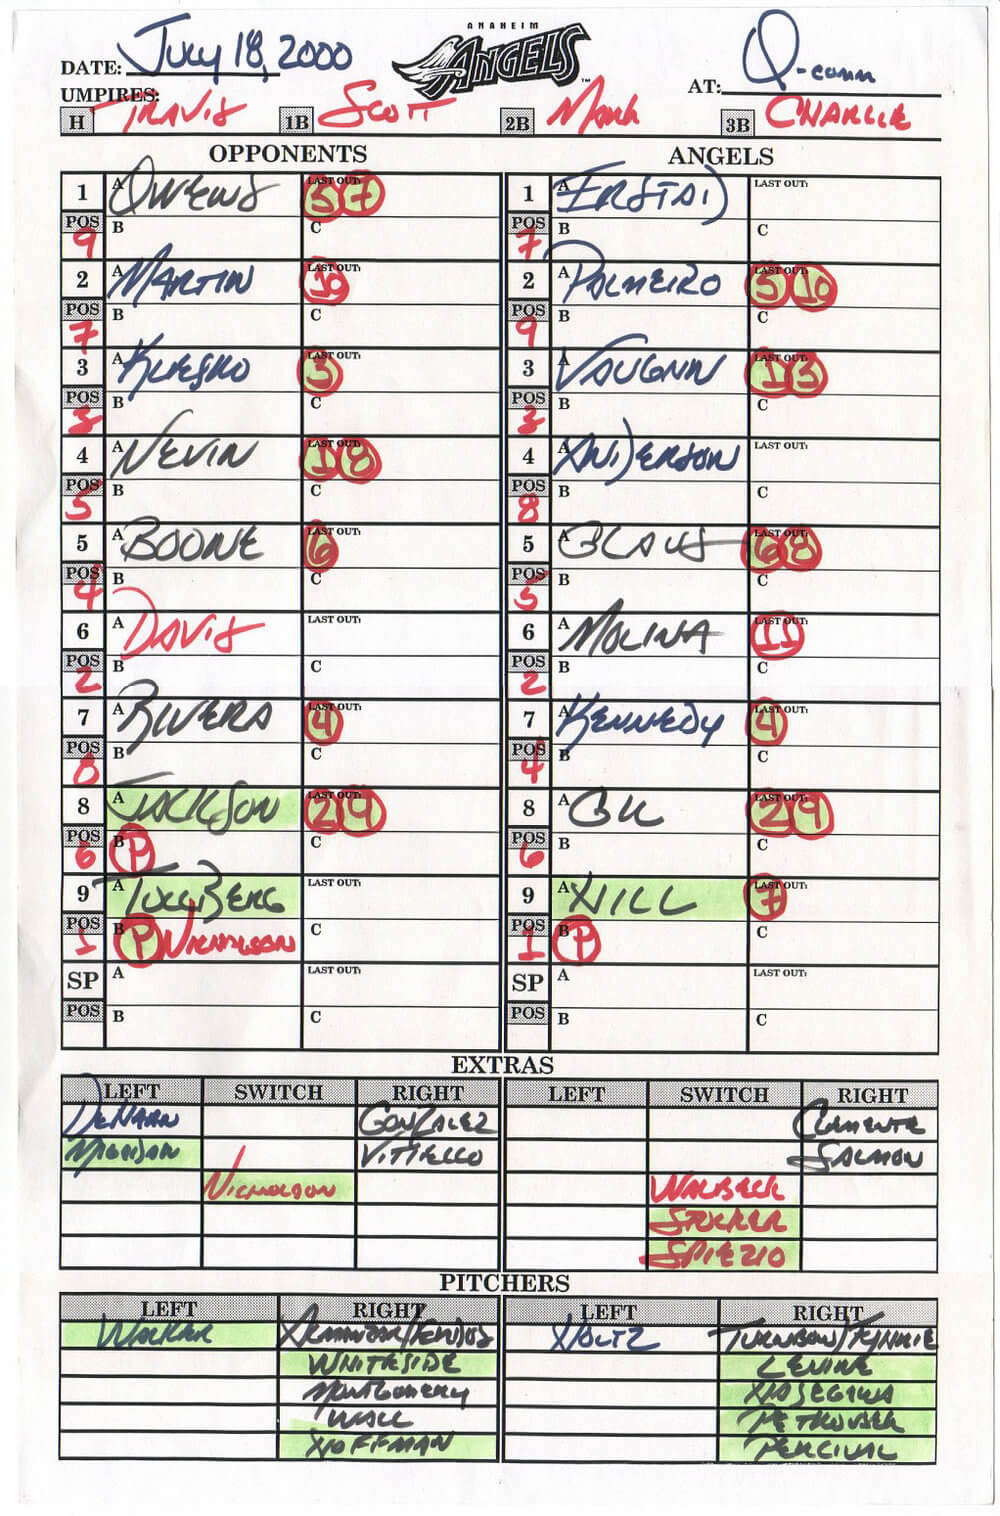 Zack Hample's Lineup Cards — Zack Hample With Dugout Lineup Card Template